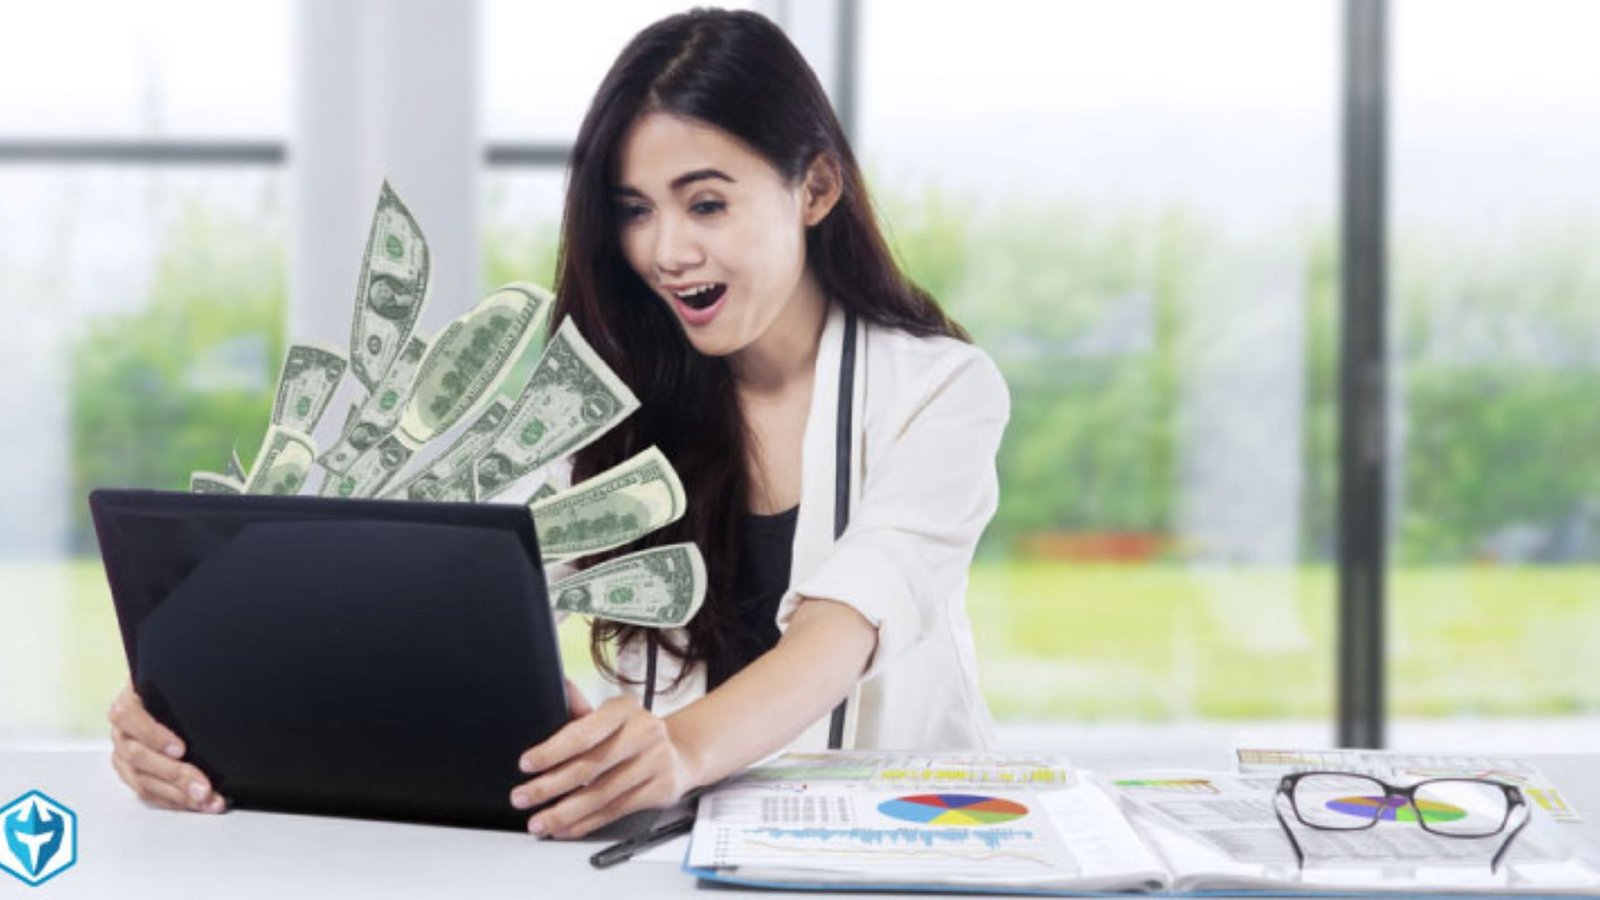 a lady looking happy with a laptop and money showing how trading makes money